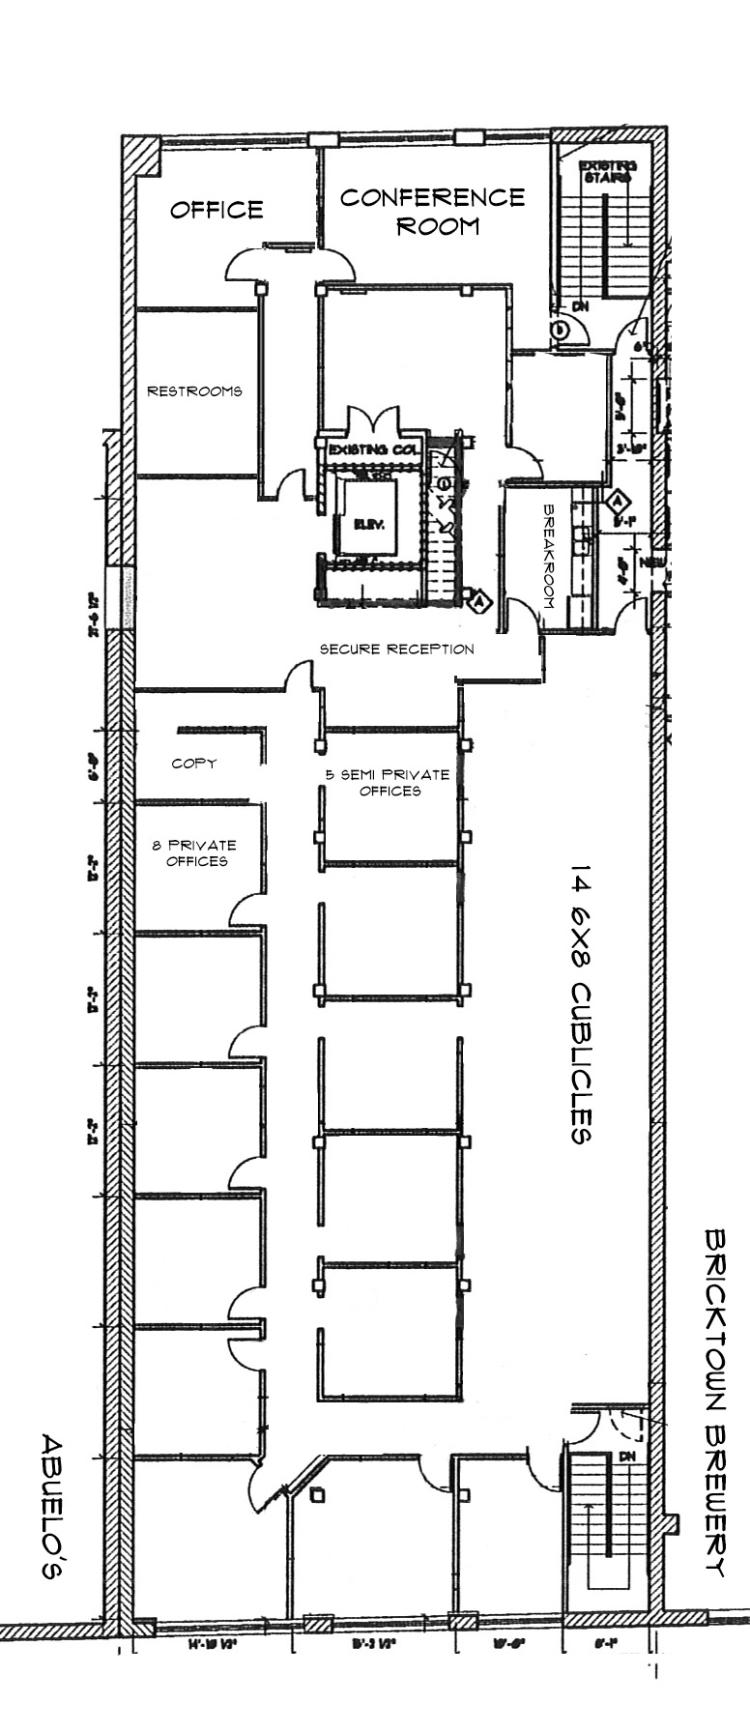 office space for lease in Bricktown Oklahoma City, Ok site plan